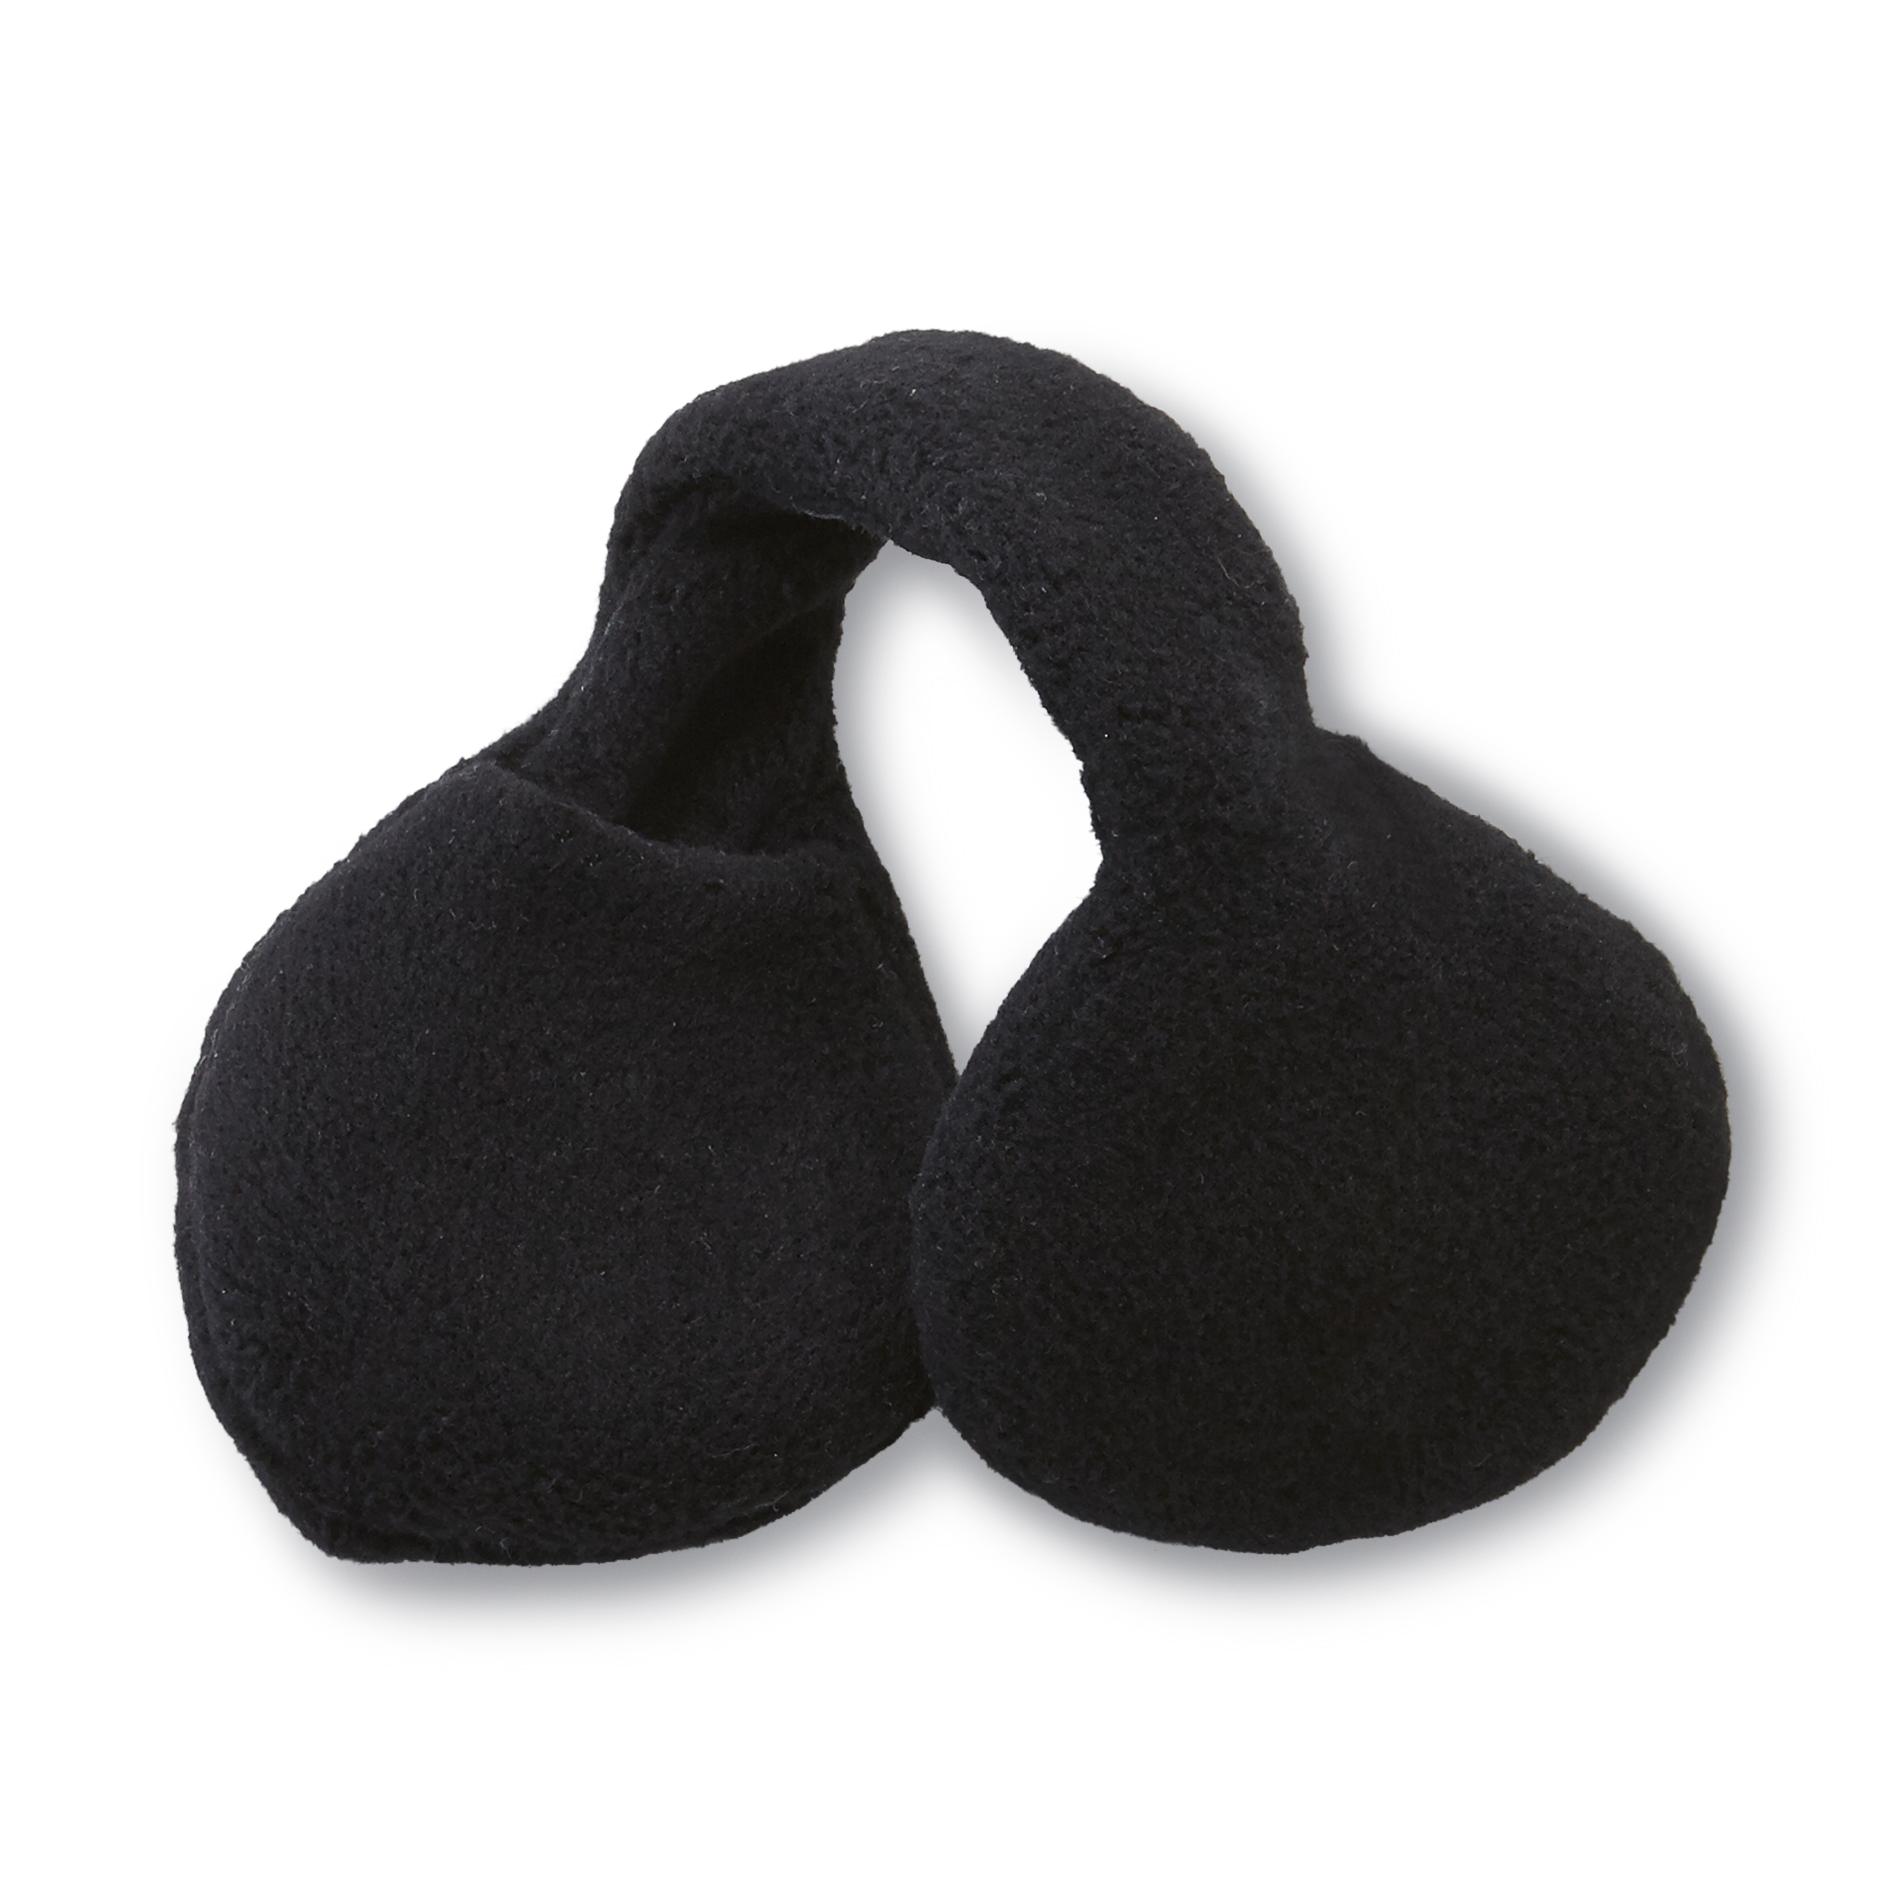 From The Blue Women's Wraparound Ear Warmers